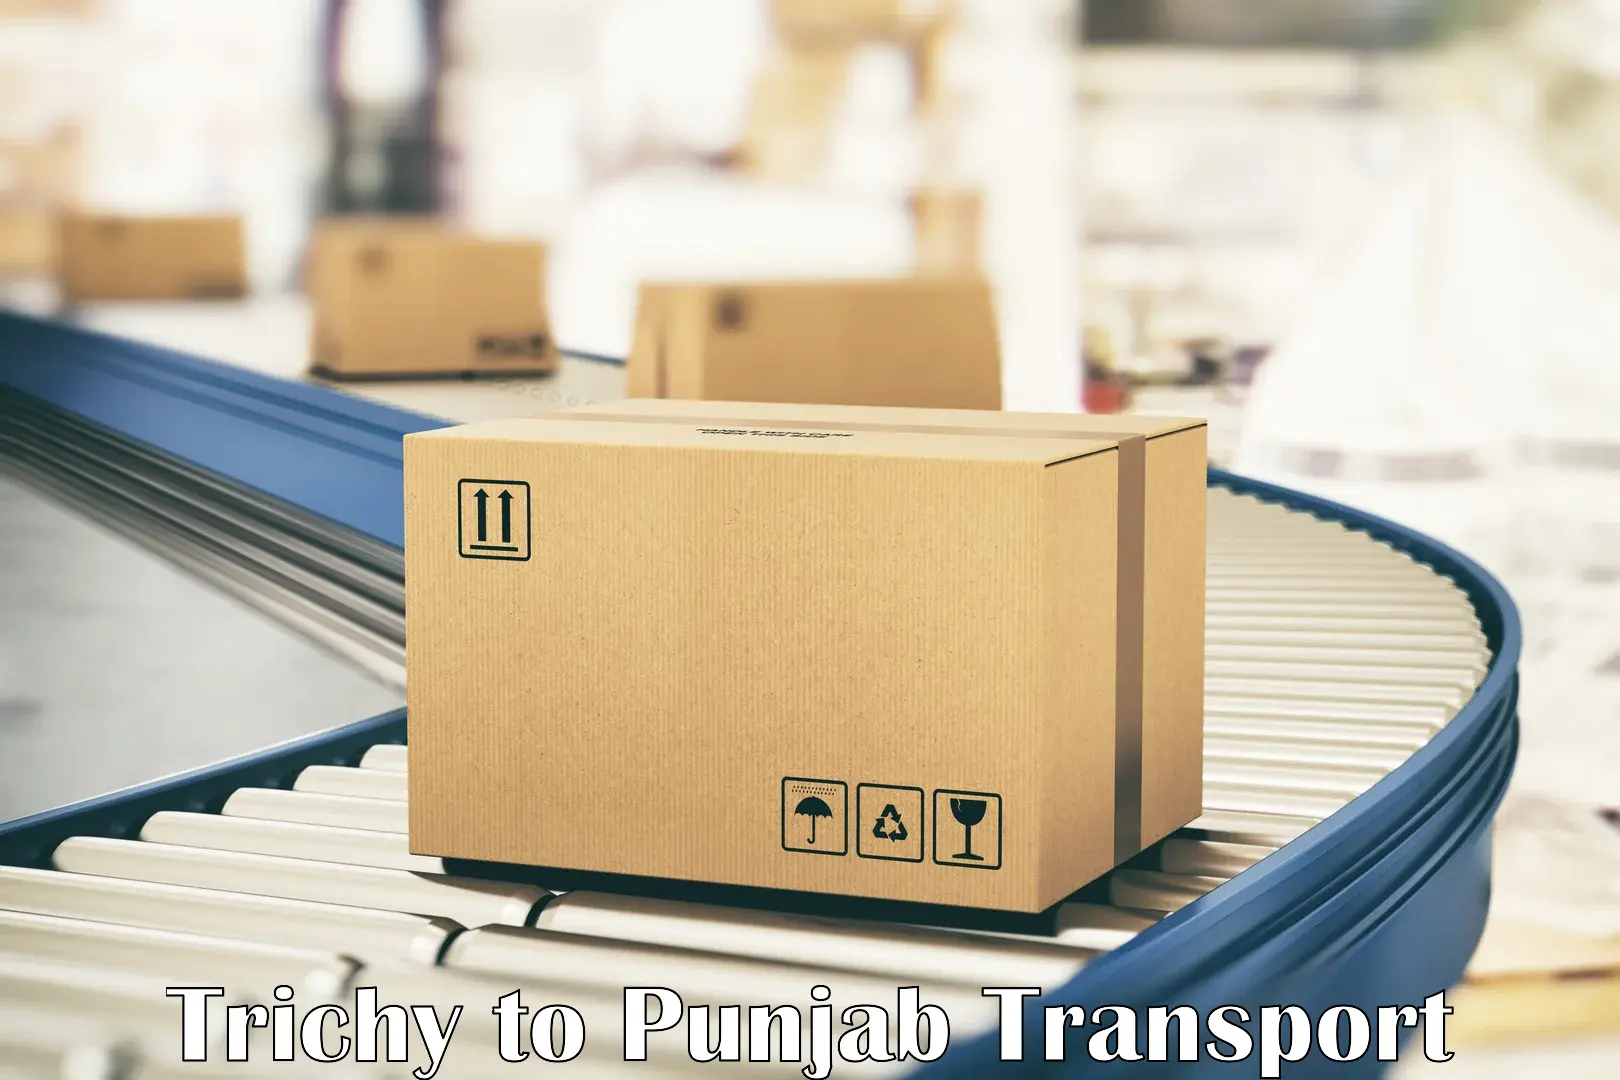 Online transport service Trichy to Pathankot